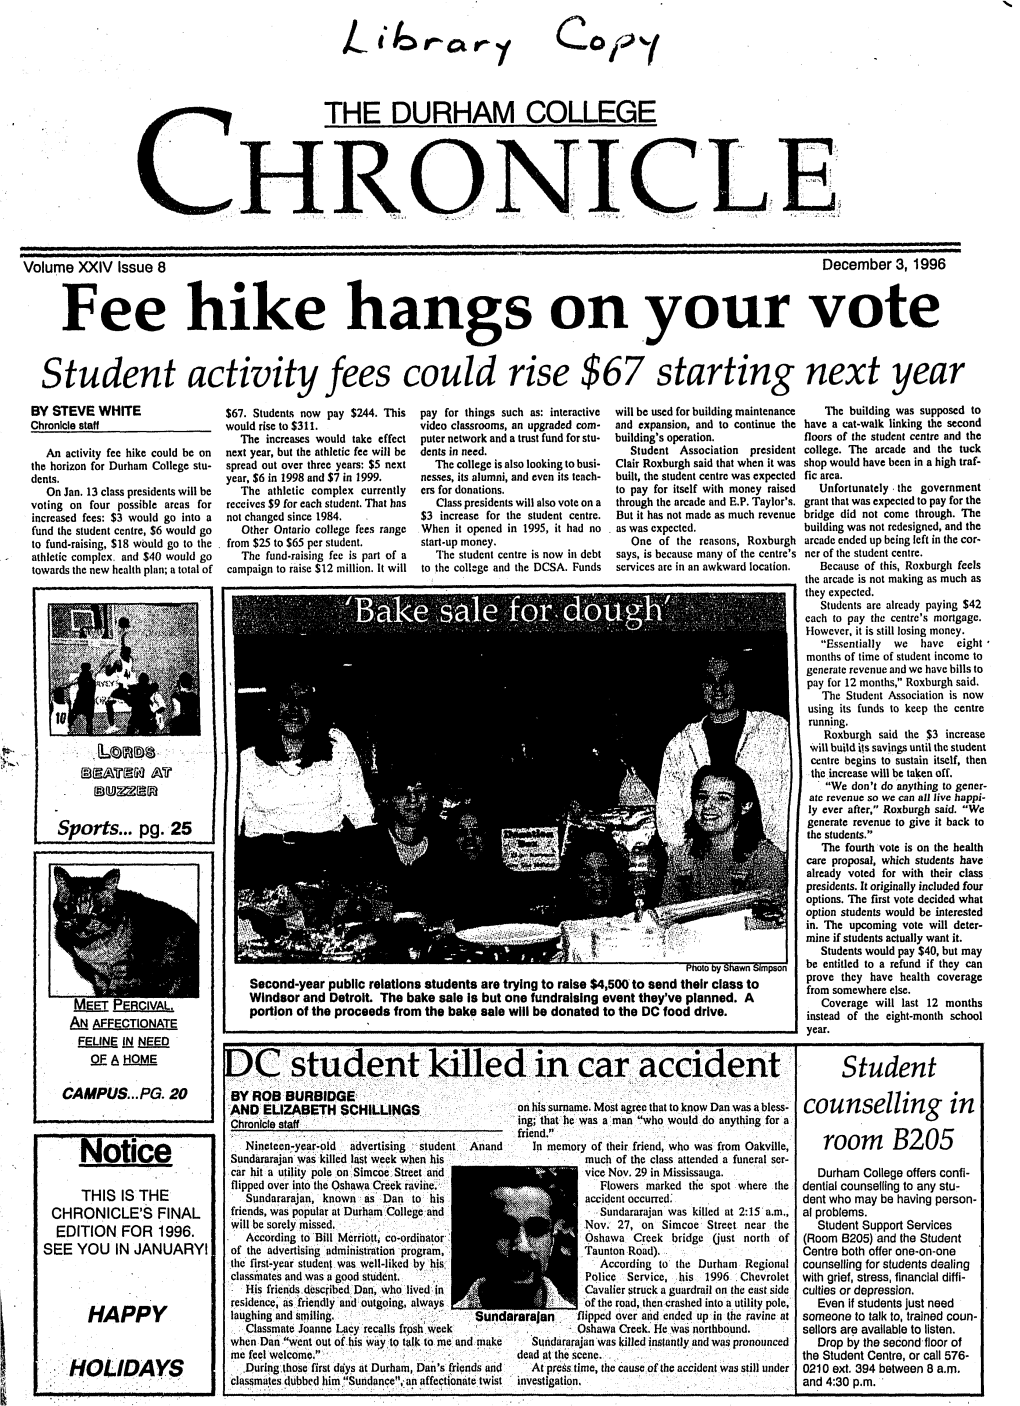 Fee Hike Hangs on Your Vote Student Activity Fees Could Rise $67 Starting Next Y Ear Ci..,L..-I., ��., BYV STEVECTFUP Whitewhftf $67.T-R-I Students Now